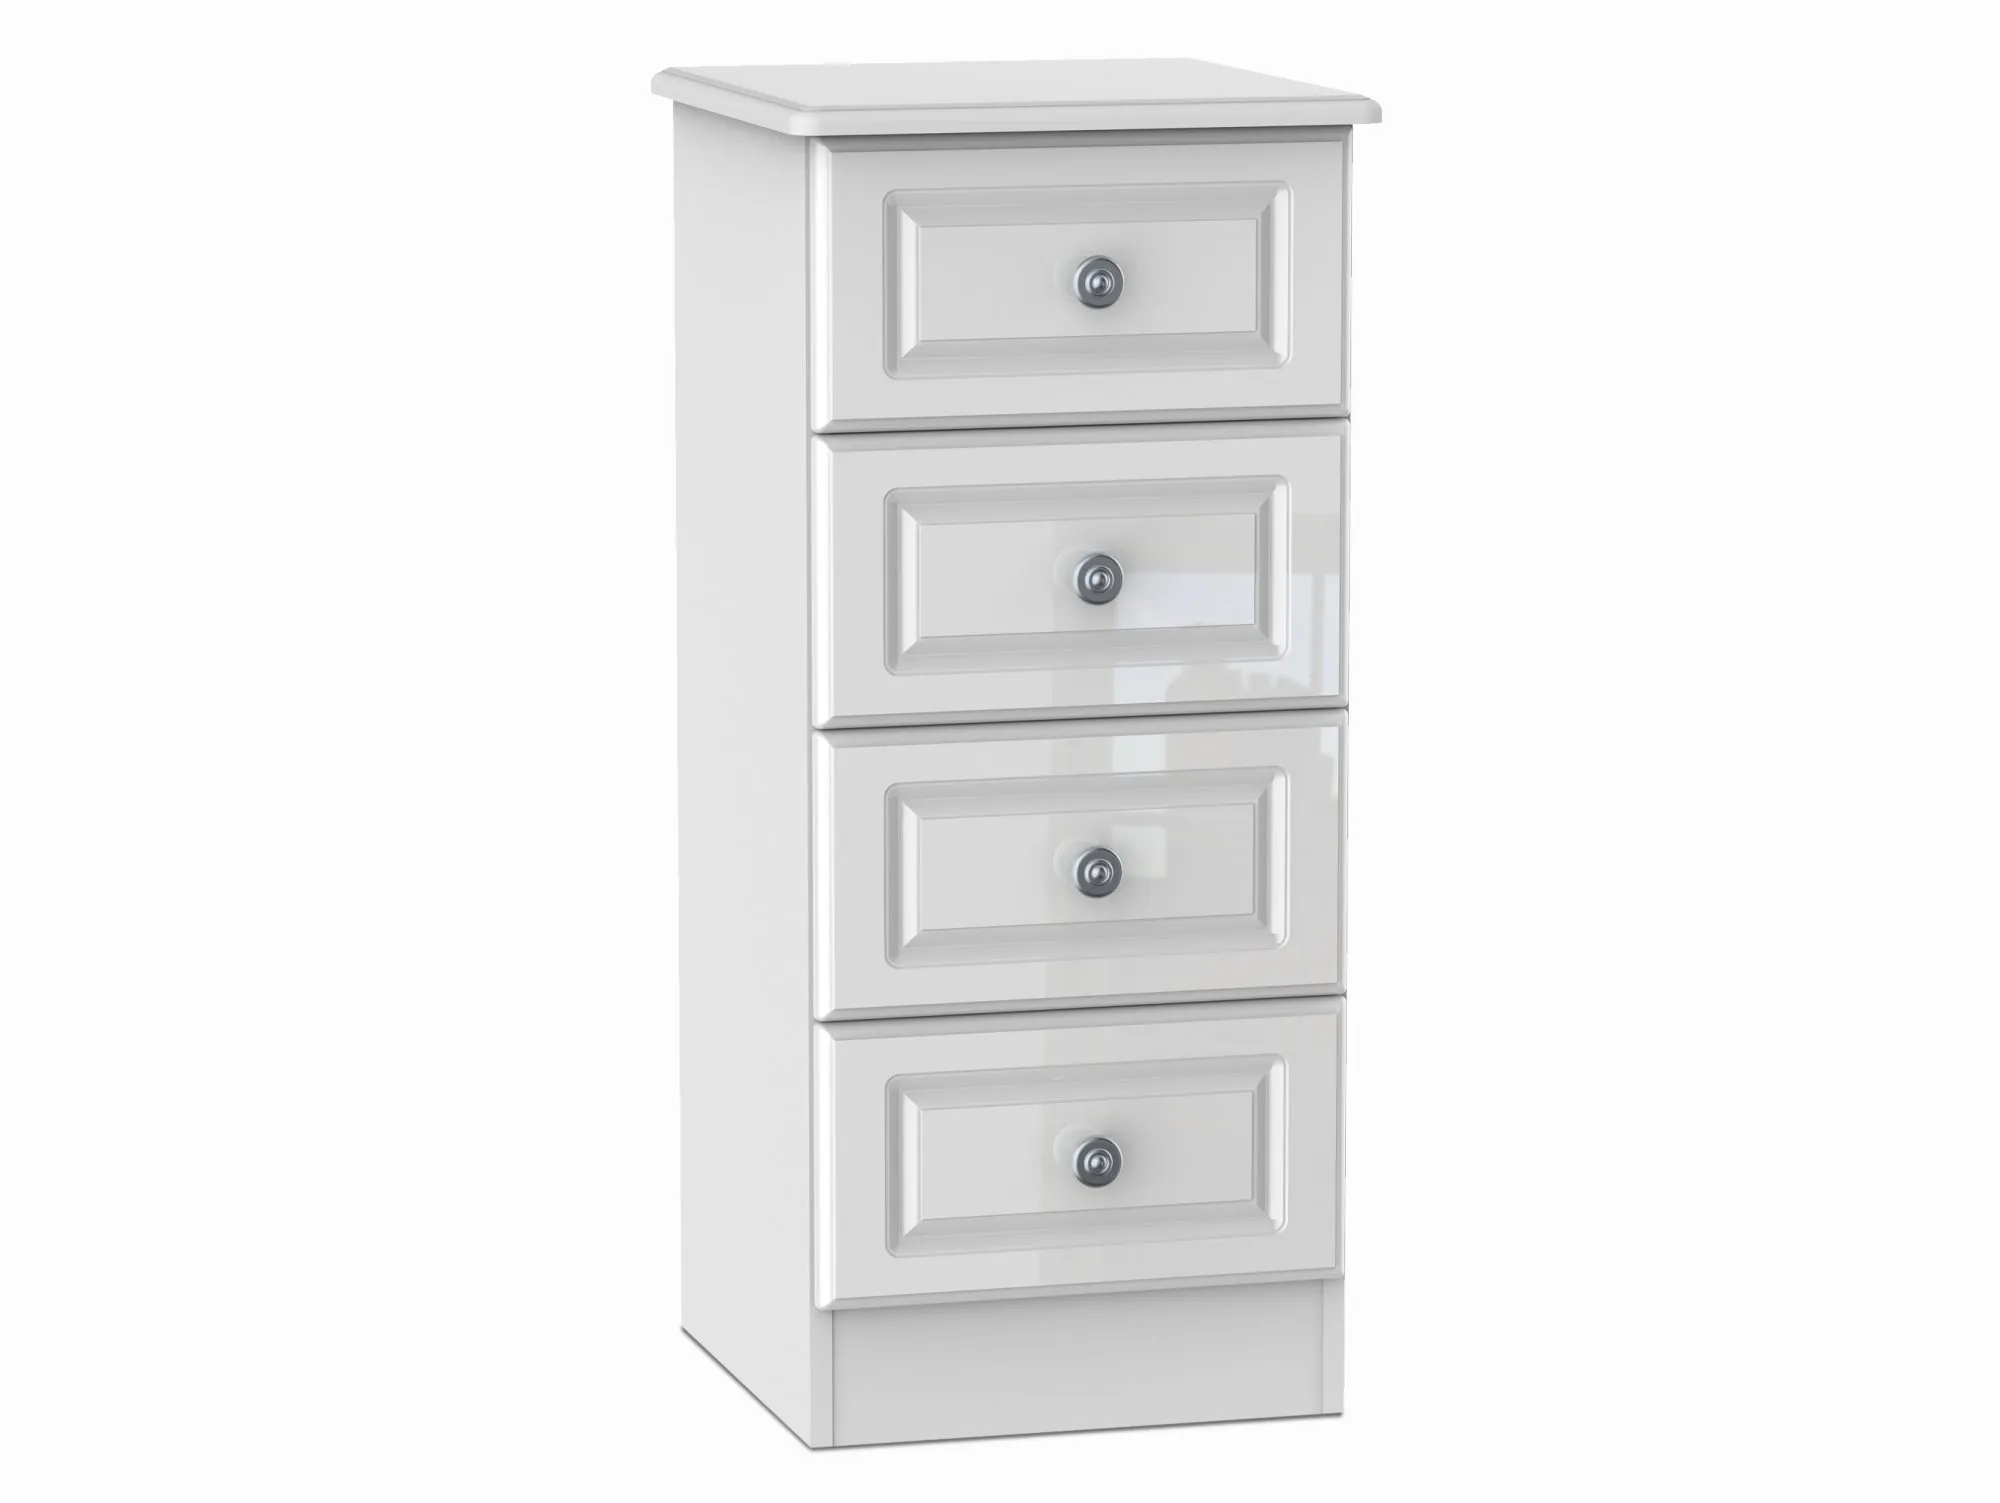 Welcome Welcome Pembroke White High Gloss 4 Drawer Narrow Chest of Drawers (Assembled)